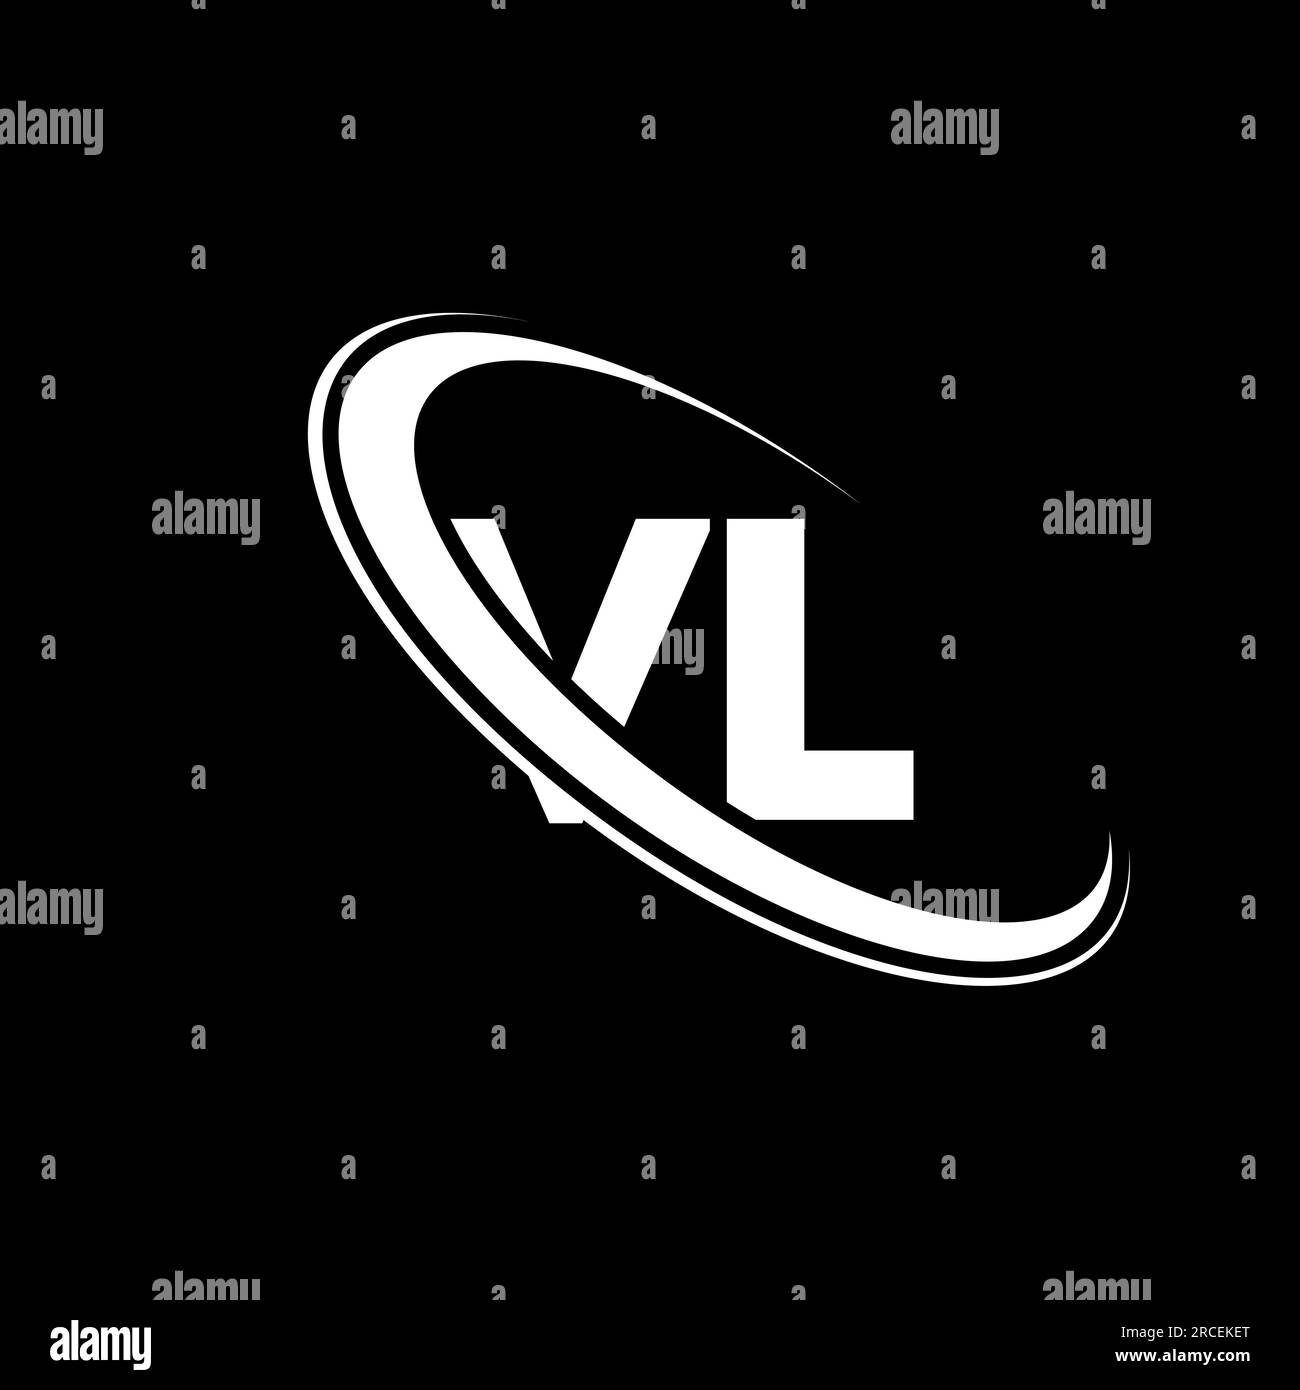 Vl design Black and White Stock Photos & Images - Alamy